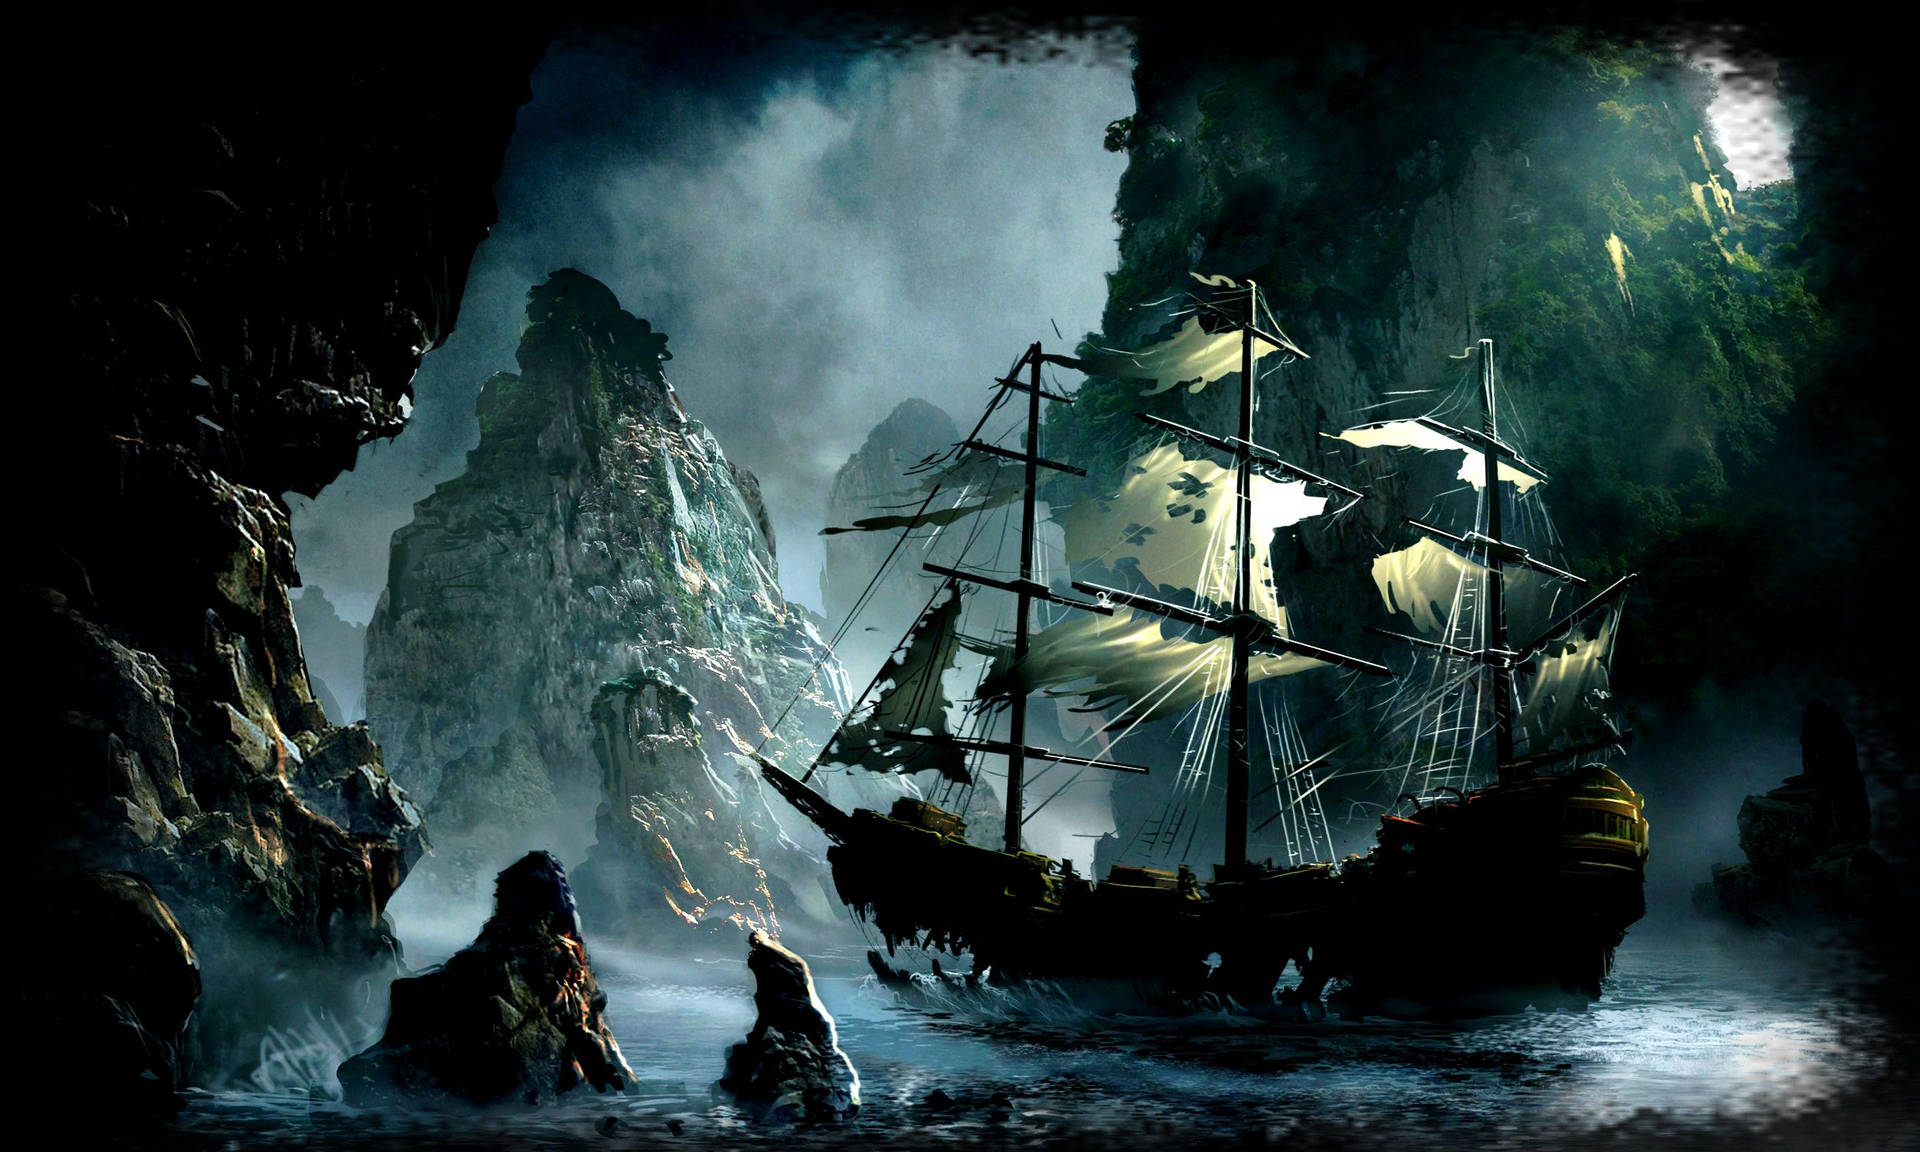 Experience a pirate adventure in an island paradise Wallpaper